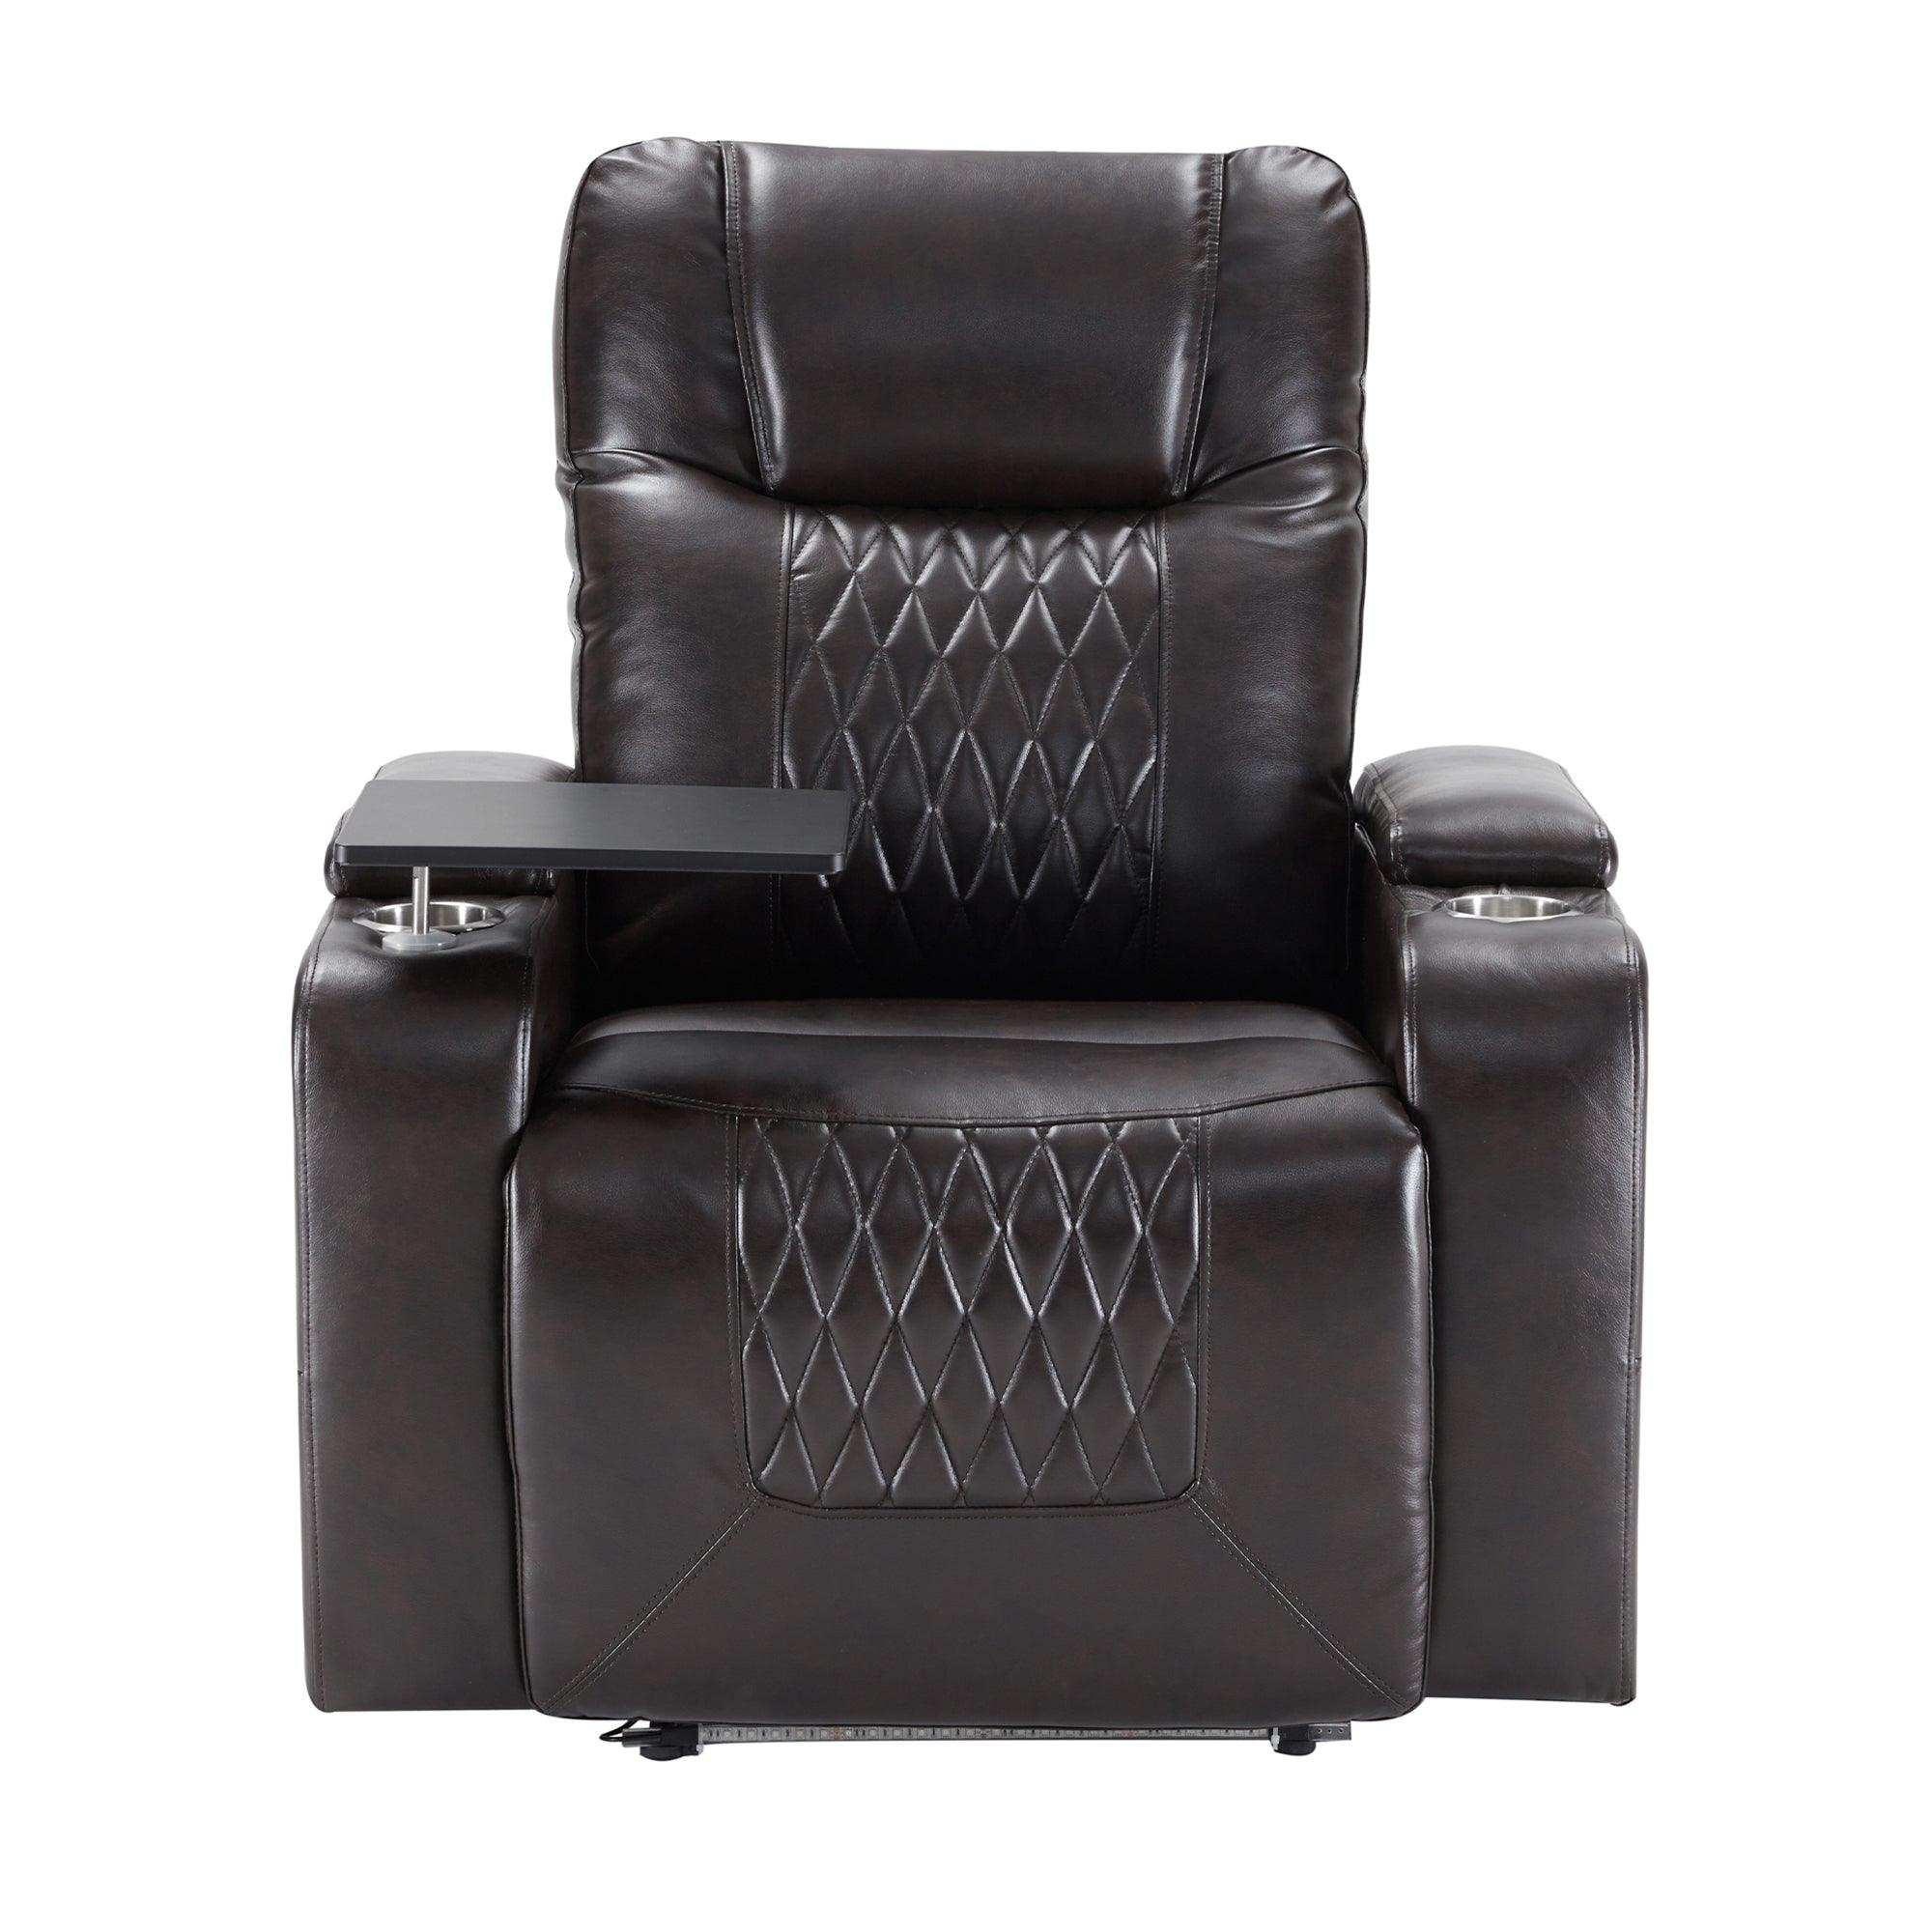 🆓🚛 Power Motion Recliner With Usb Charging Port & Hidden Arm Storage 2 Convenient Cup Holders Design & 360° Swivel Tray Table, Black